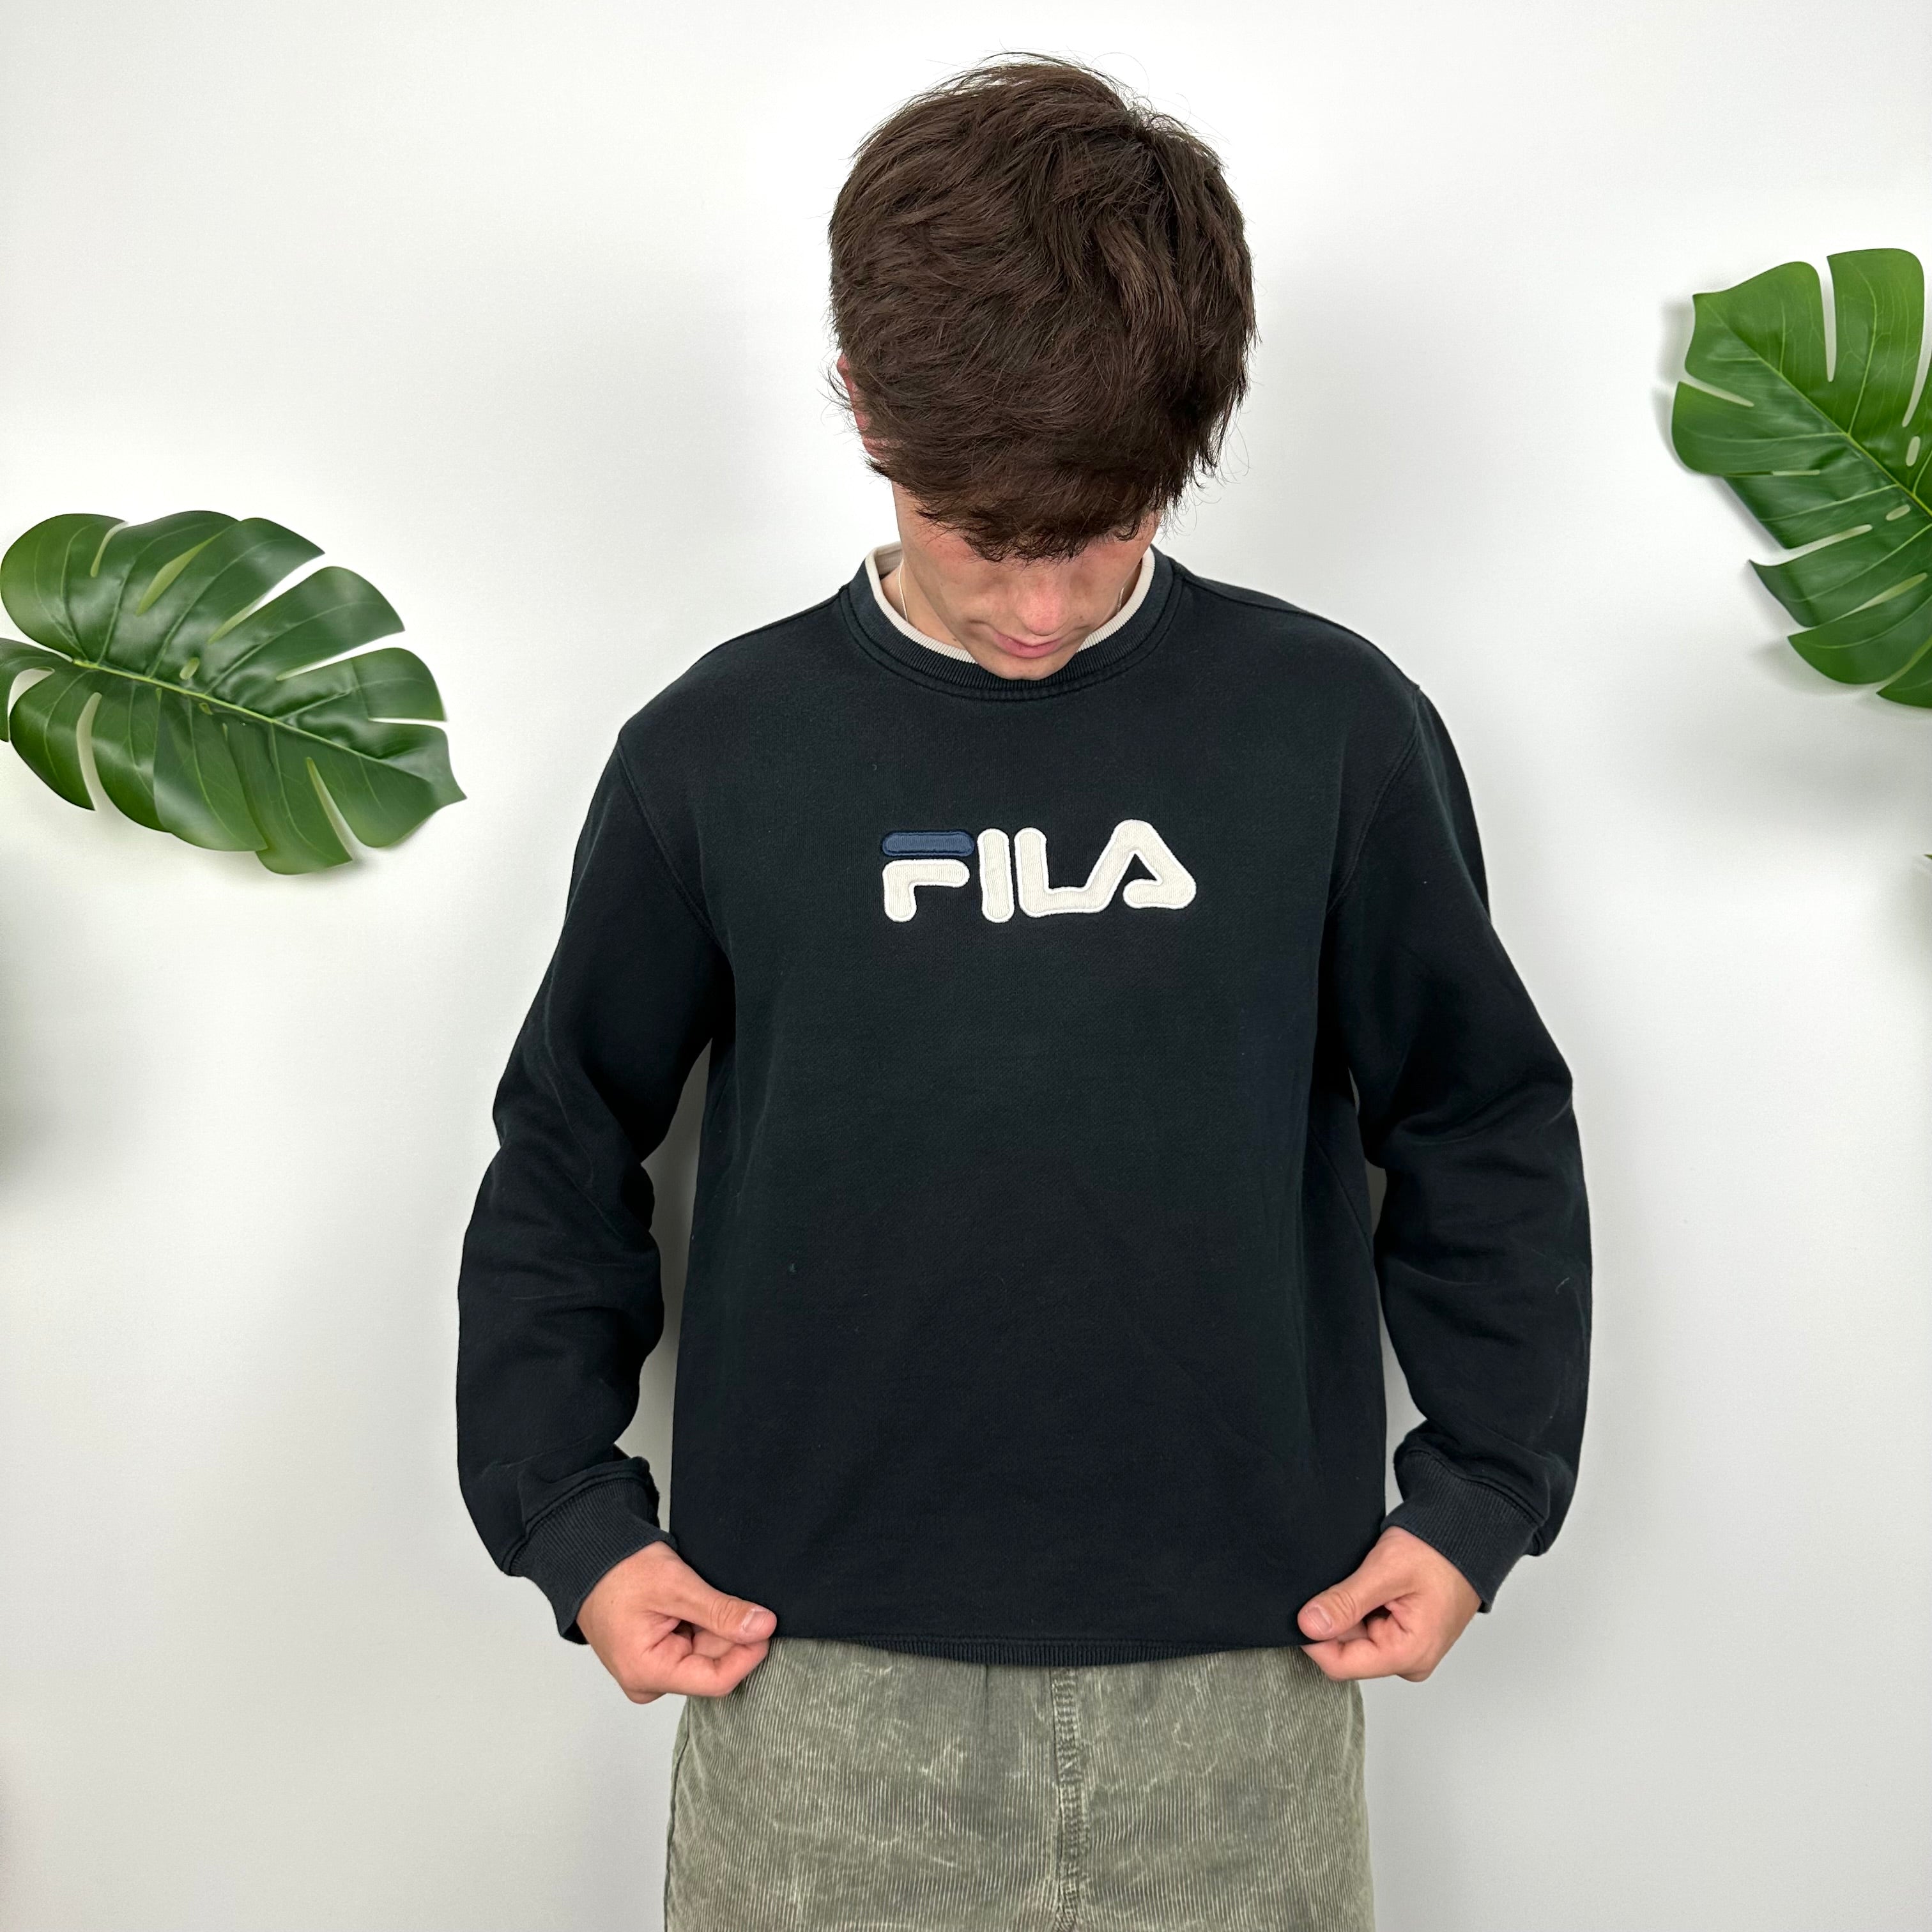 FILA Navy Embroidered Spell Out Sweatshirt (S)